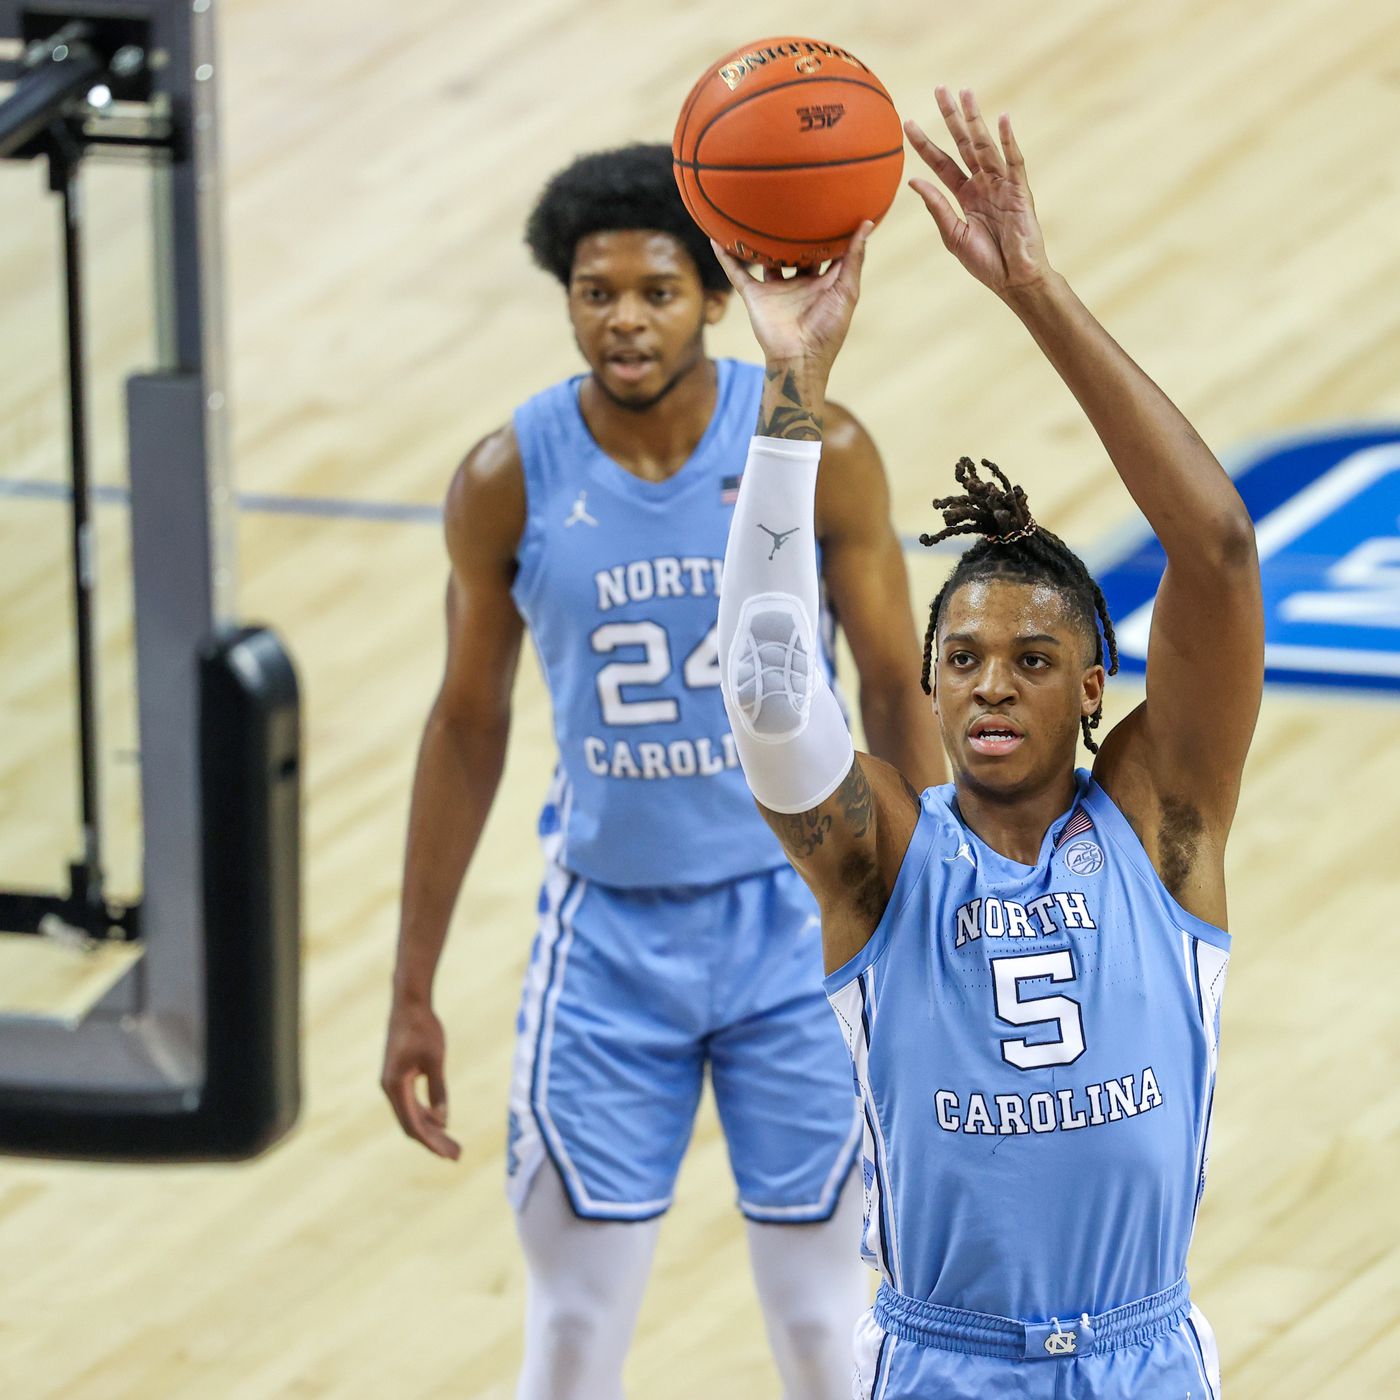 UNC Basketball: What does the future hold for Armando Bacot? - Tar Heel Blog